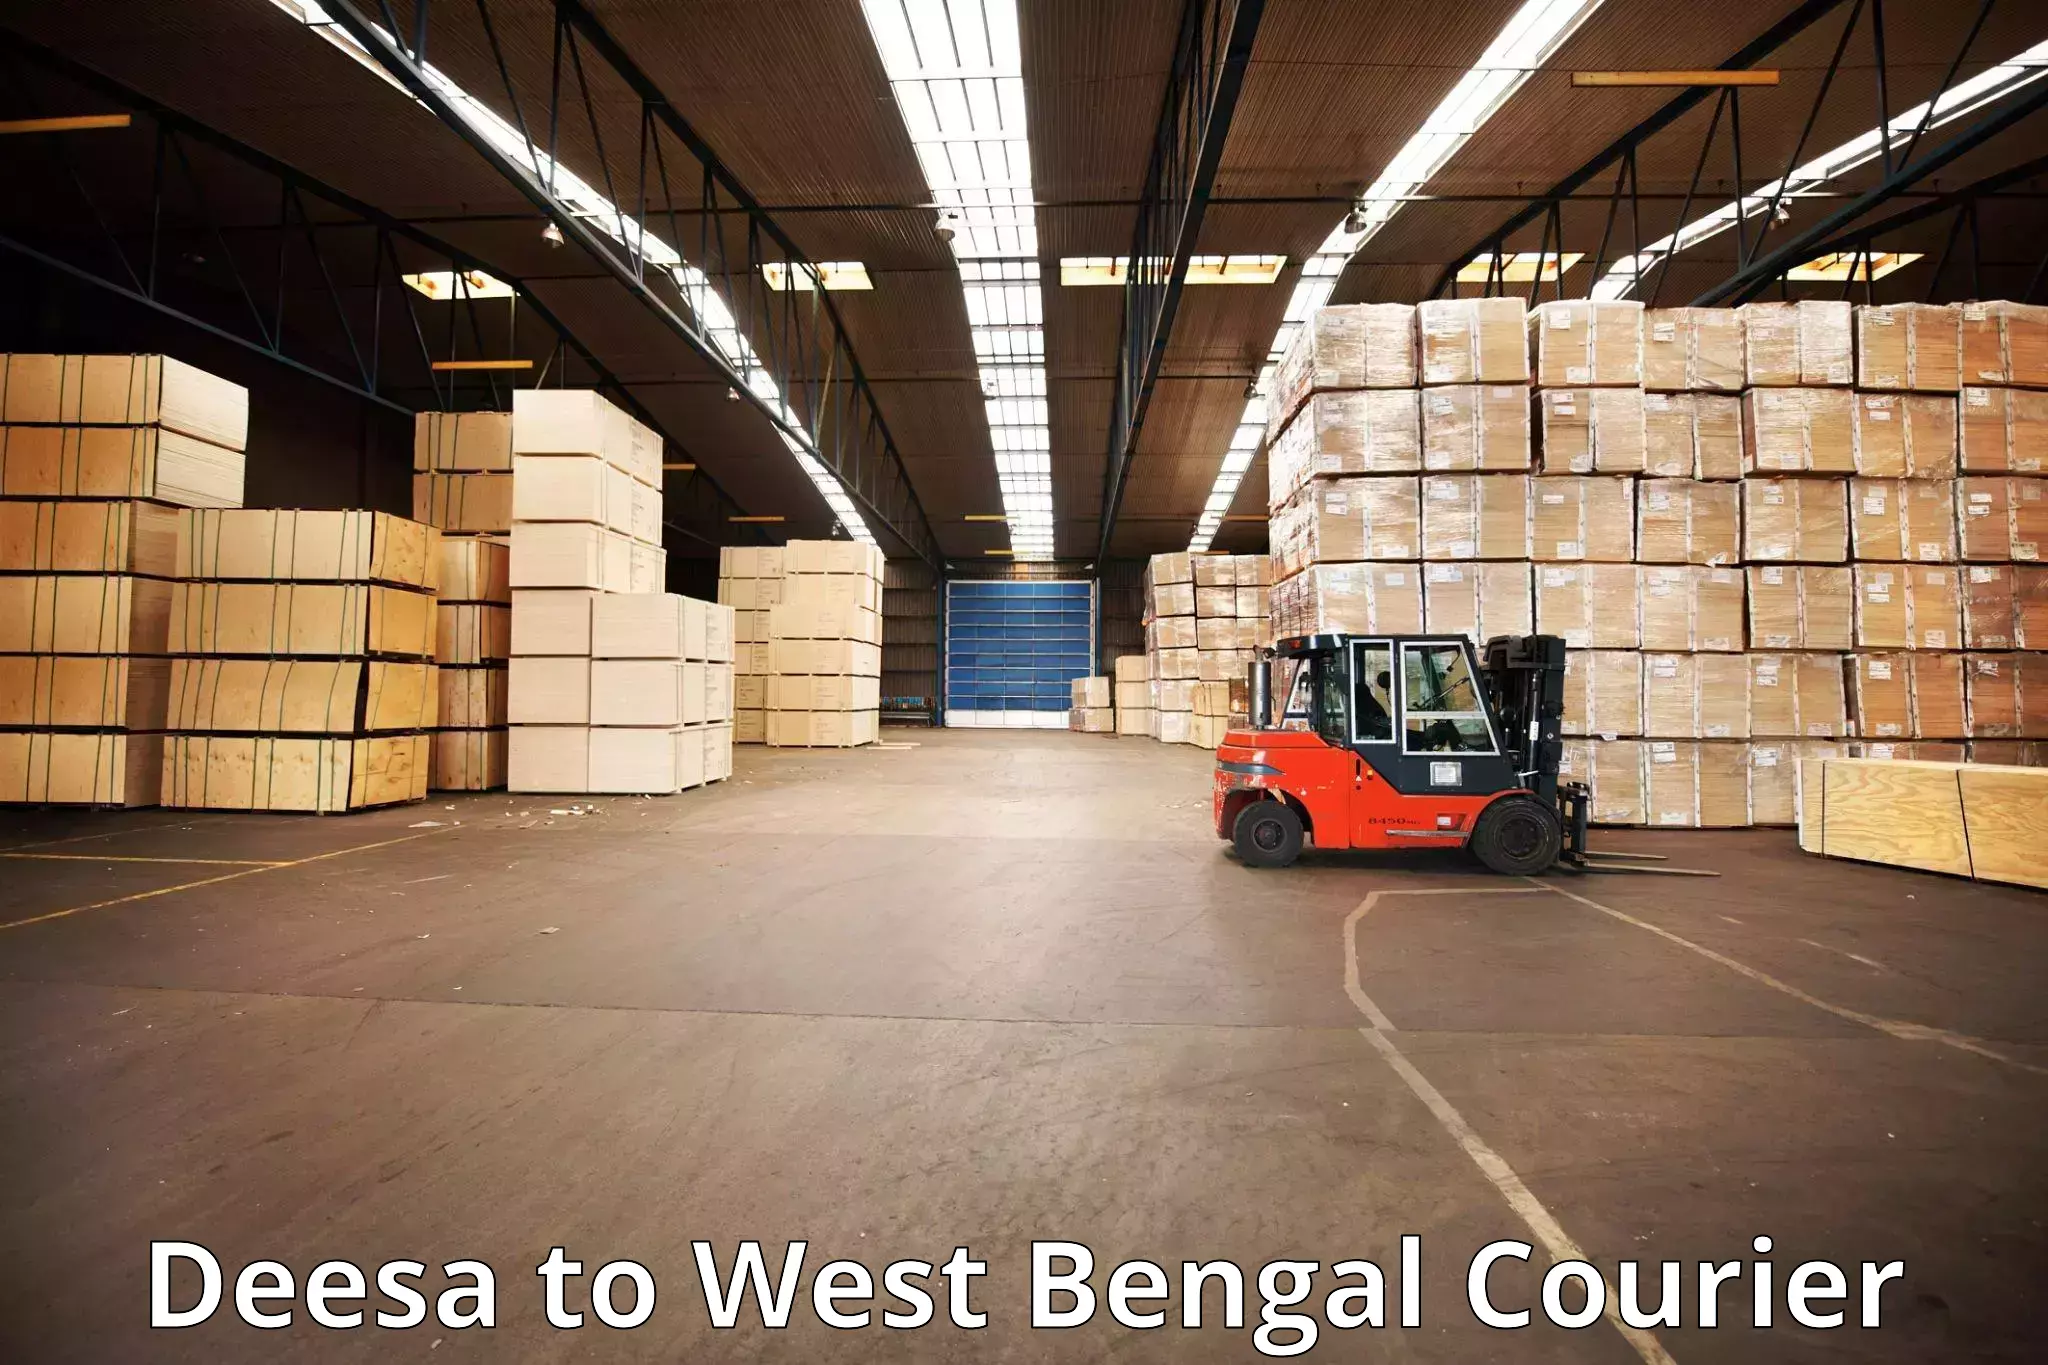 Baggage transport network Deesa to West Bengal